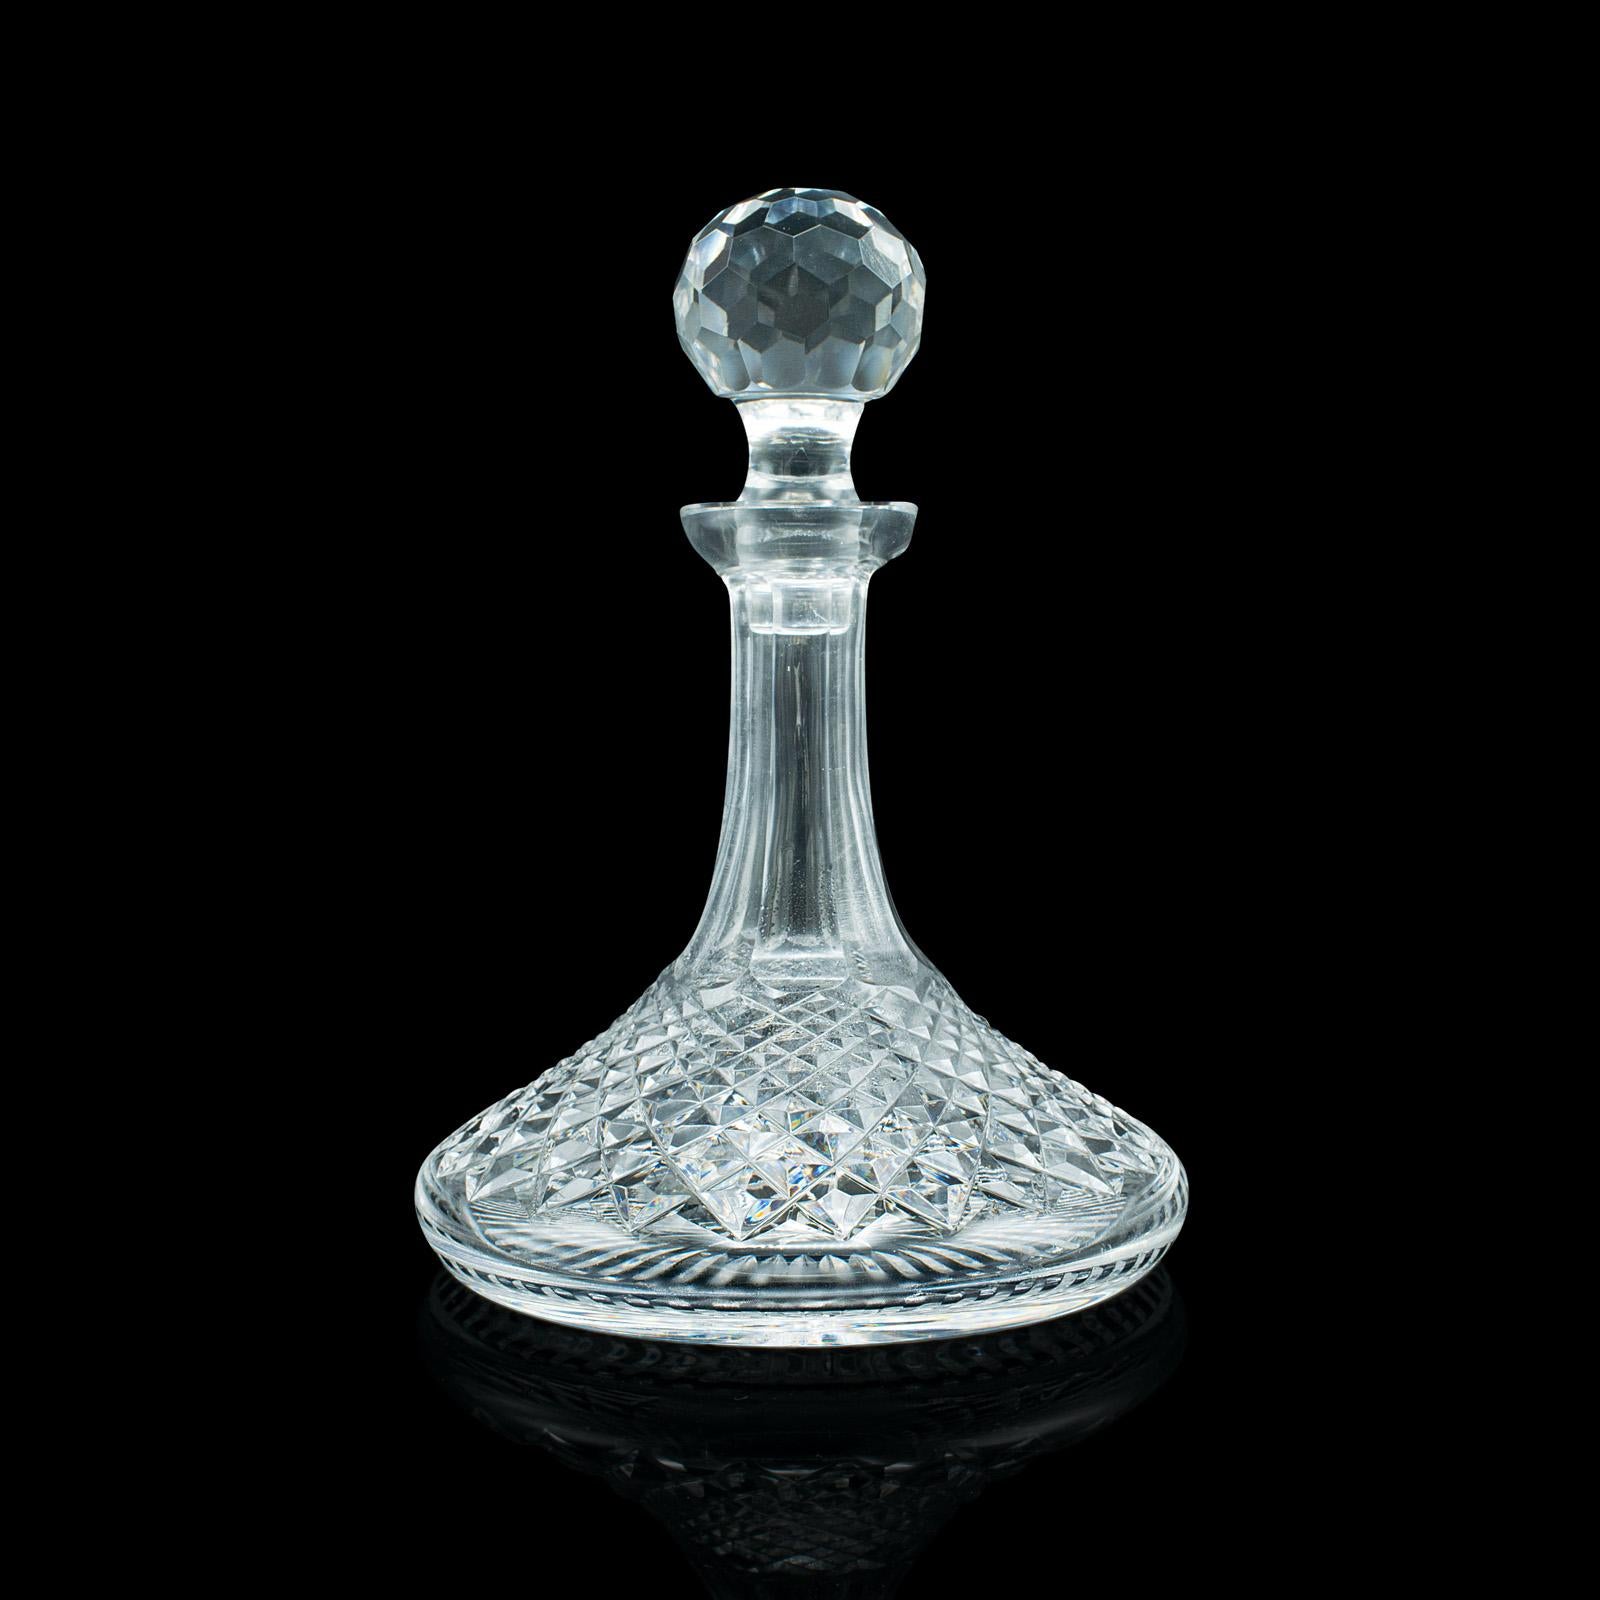 This is a vintage ship's decanter. An English, cut glass spirit or wine vessel, dating to the mid 20th century, circa 1950.

Beautifully cut glass in the traditional 'ship's decanter' wide-base form
Displays a desirable aged patina and in fine